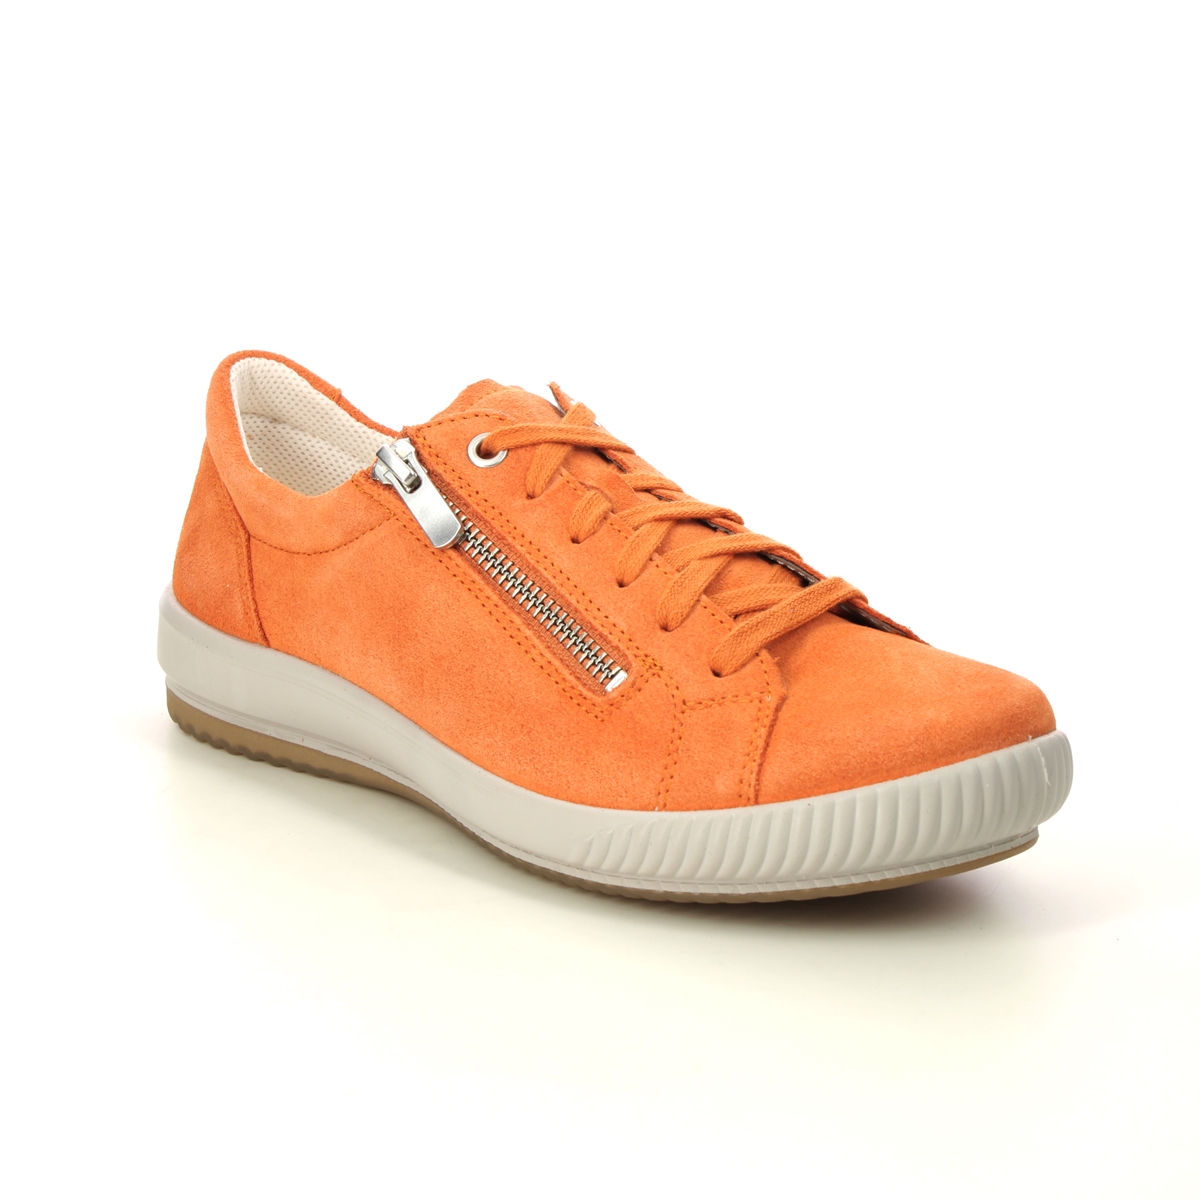 Legero Tanaro 5 Zip Orange suede Womens lacing shoes 2001162-5450 in a Plain Leather in Size 8